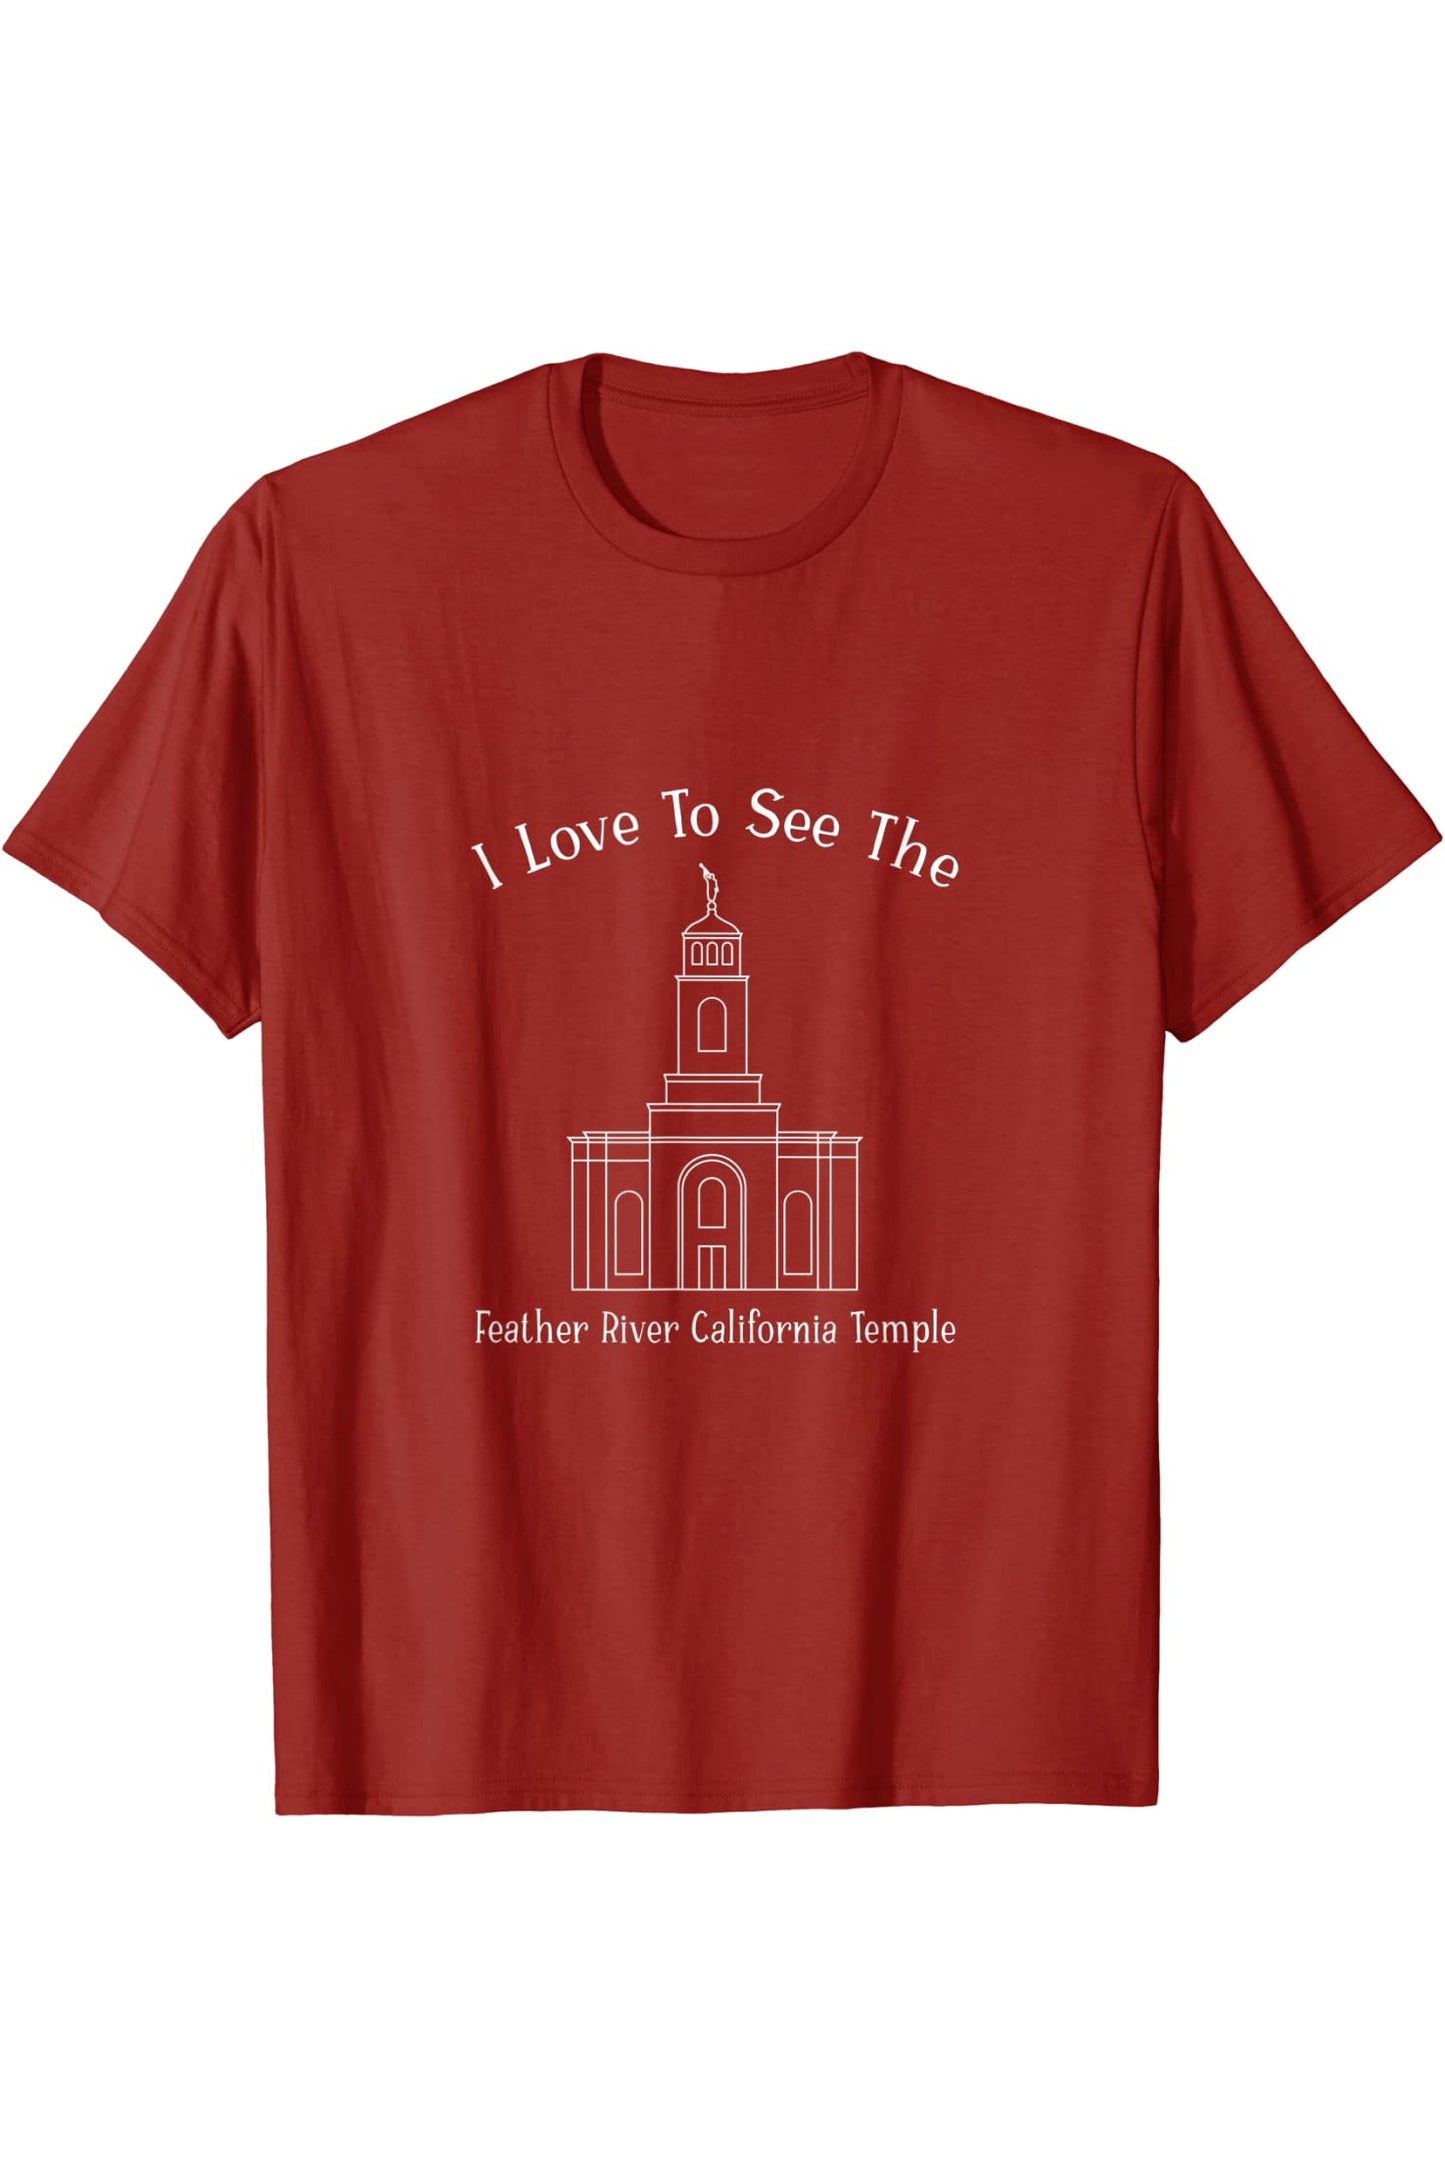 Feather River California Temple T-Shirt - Happy Style (English) US